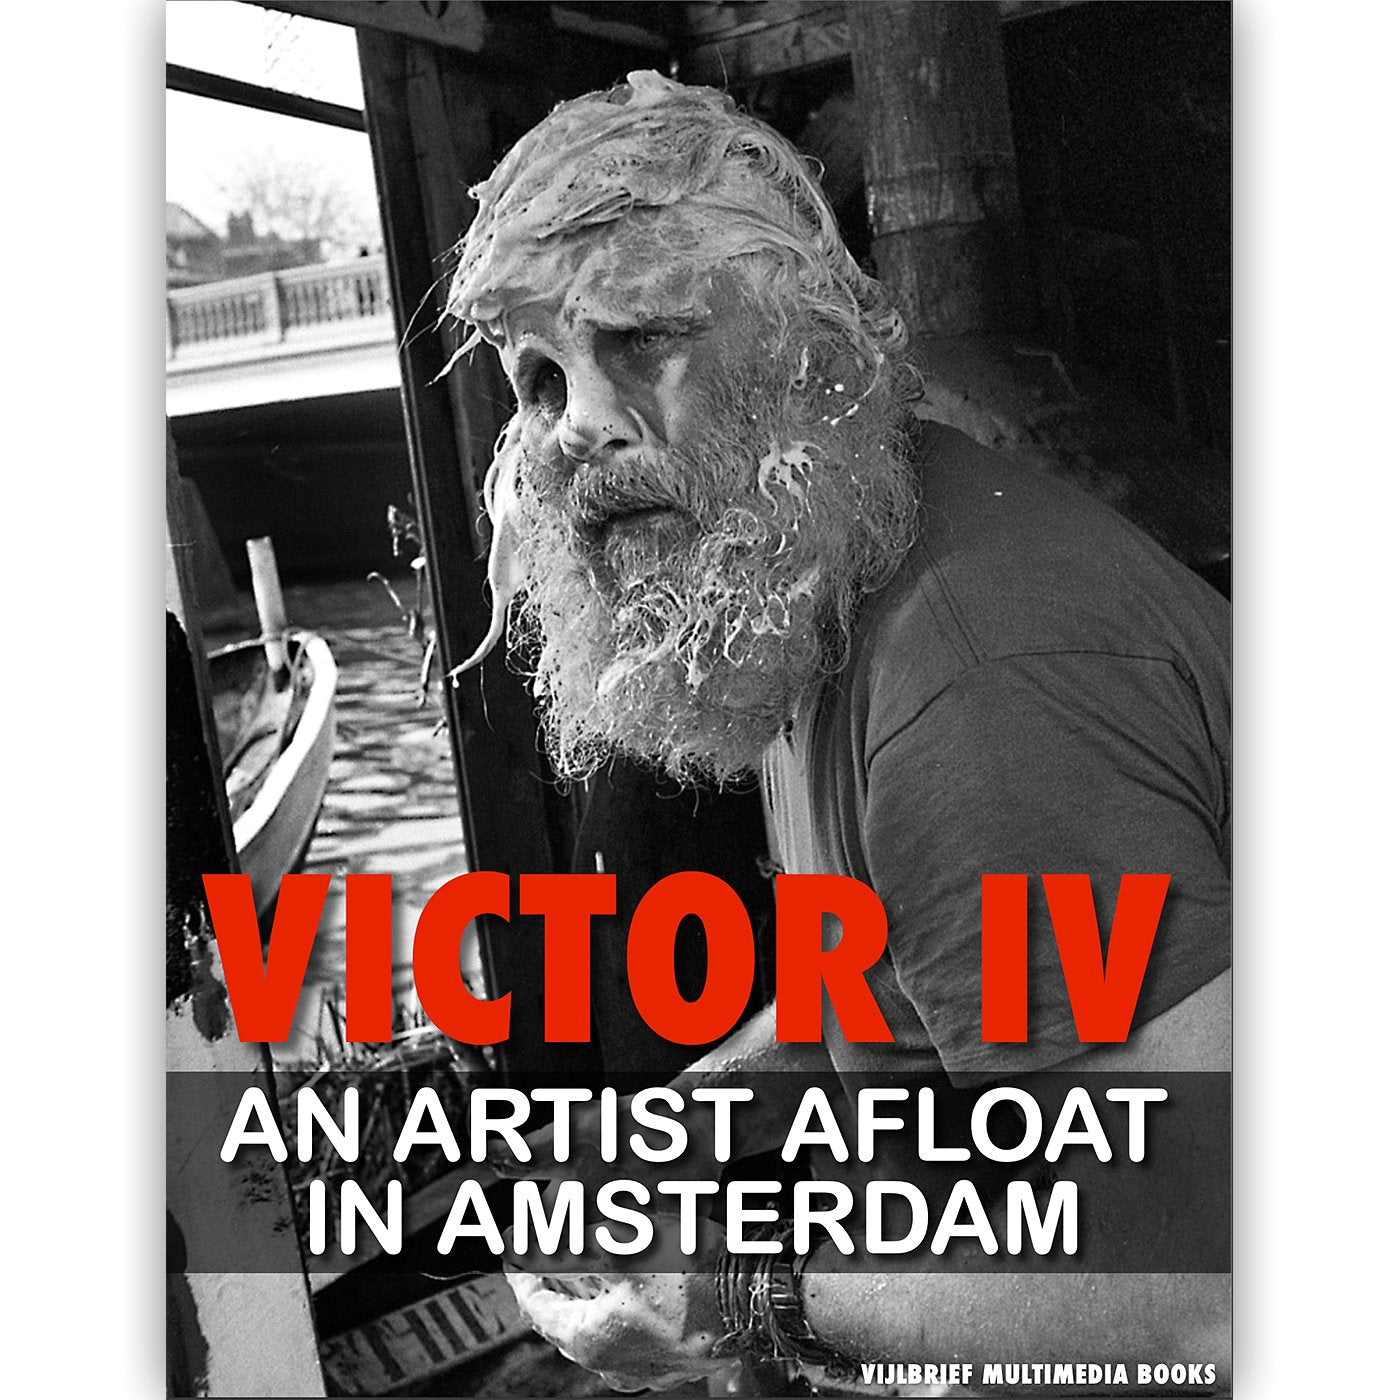 Victor IV, an artist afloat in Amsterdam